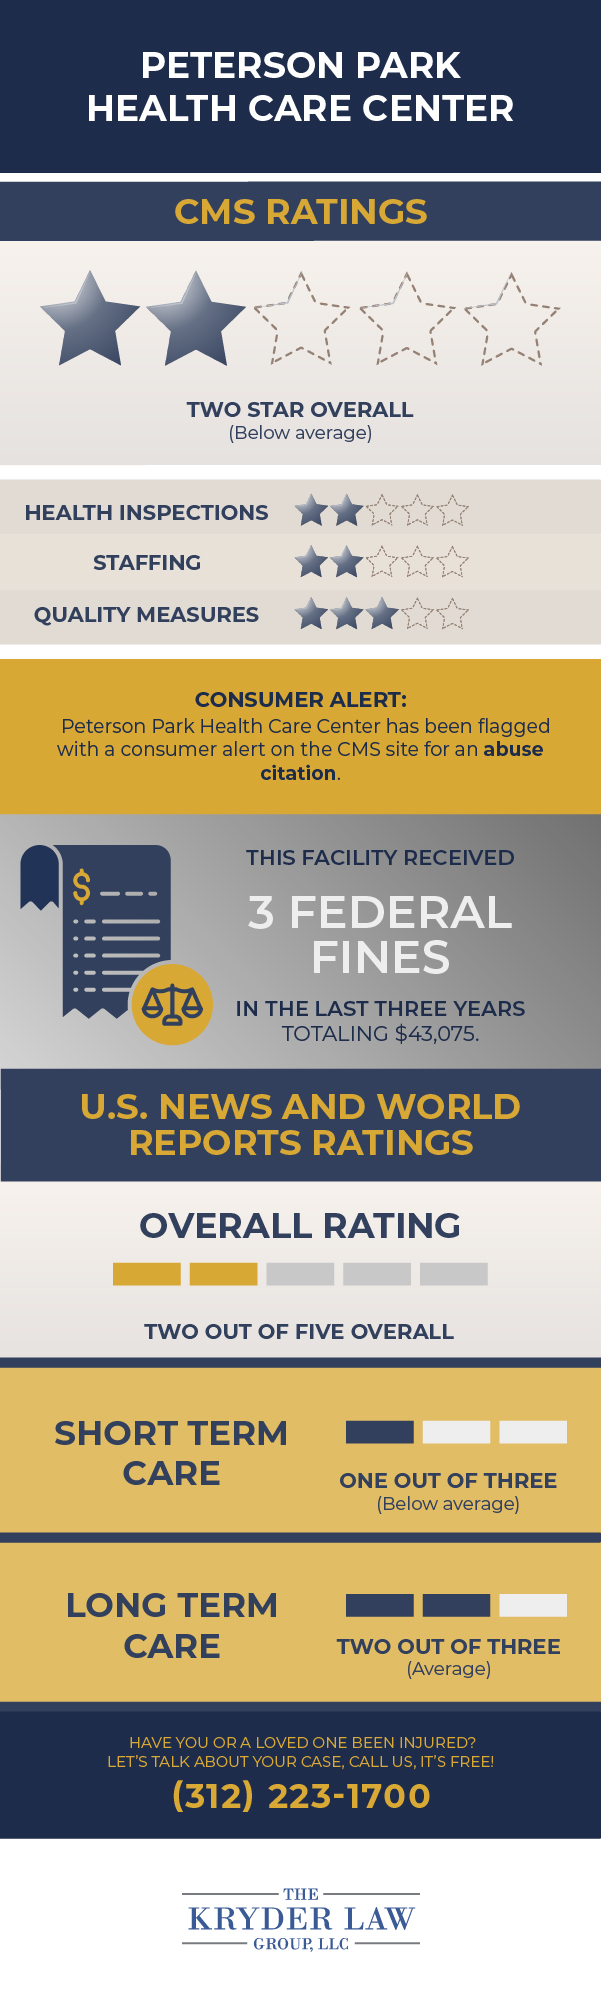 Peterson Park Health Care Center CMS Ratings and U.S. News and World Reports Ratings